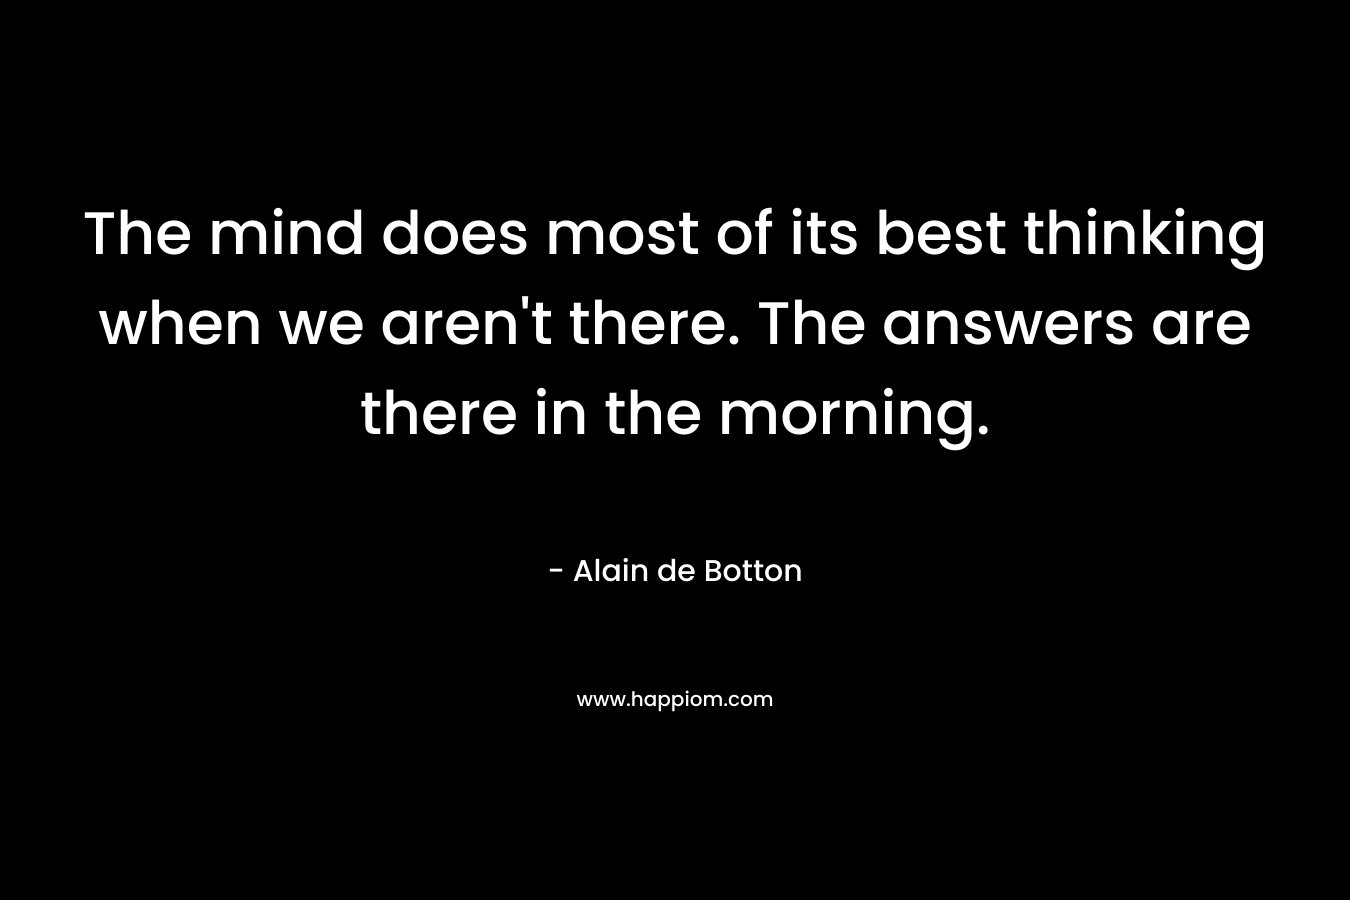 The mind does most of its best thinking when we aren't there. The answers are there in the morning.